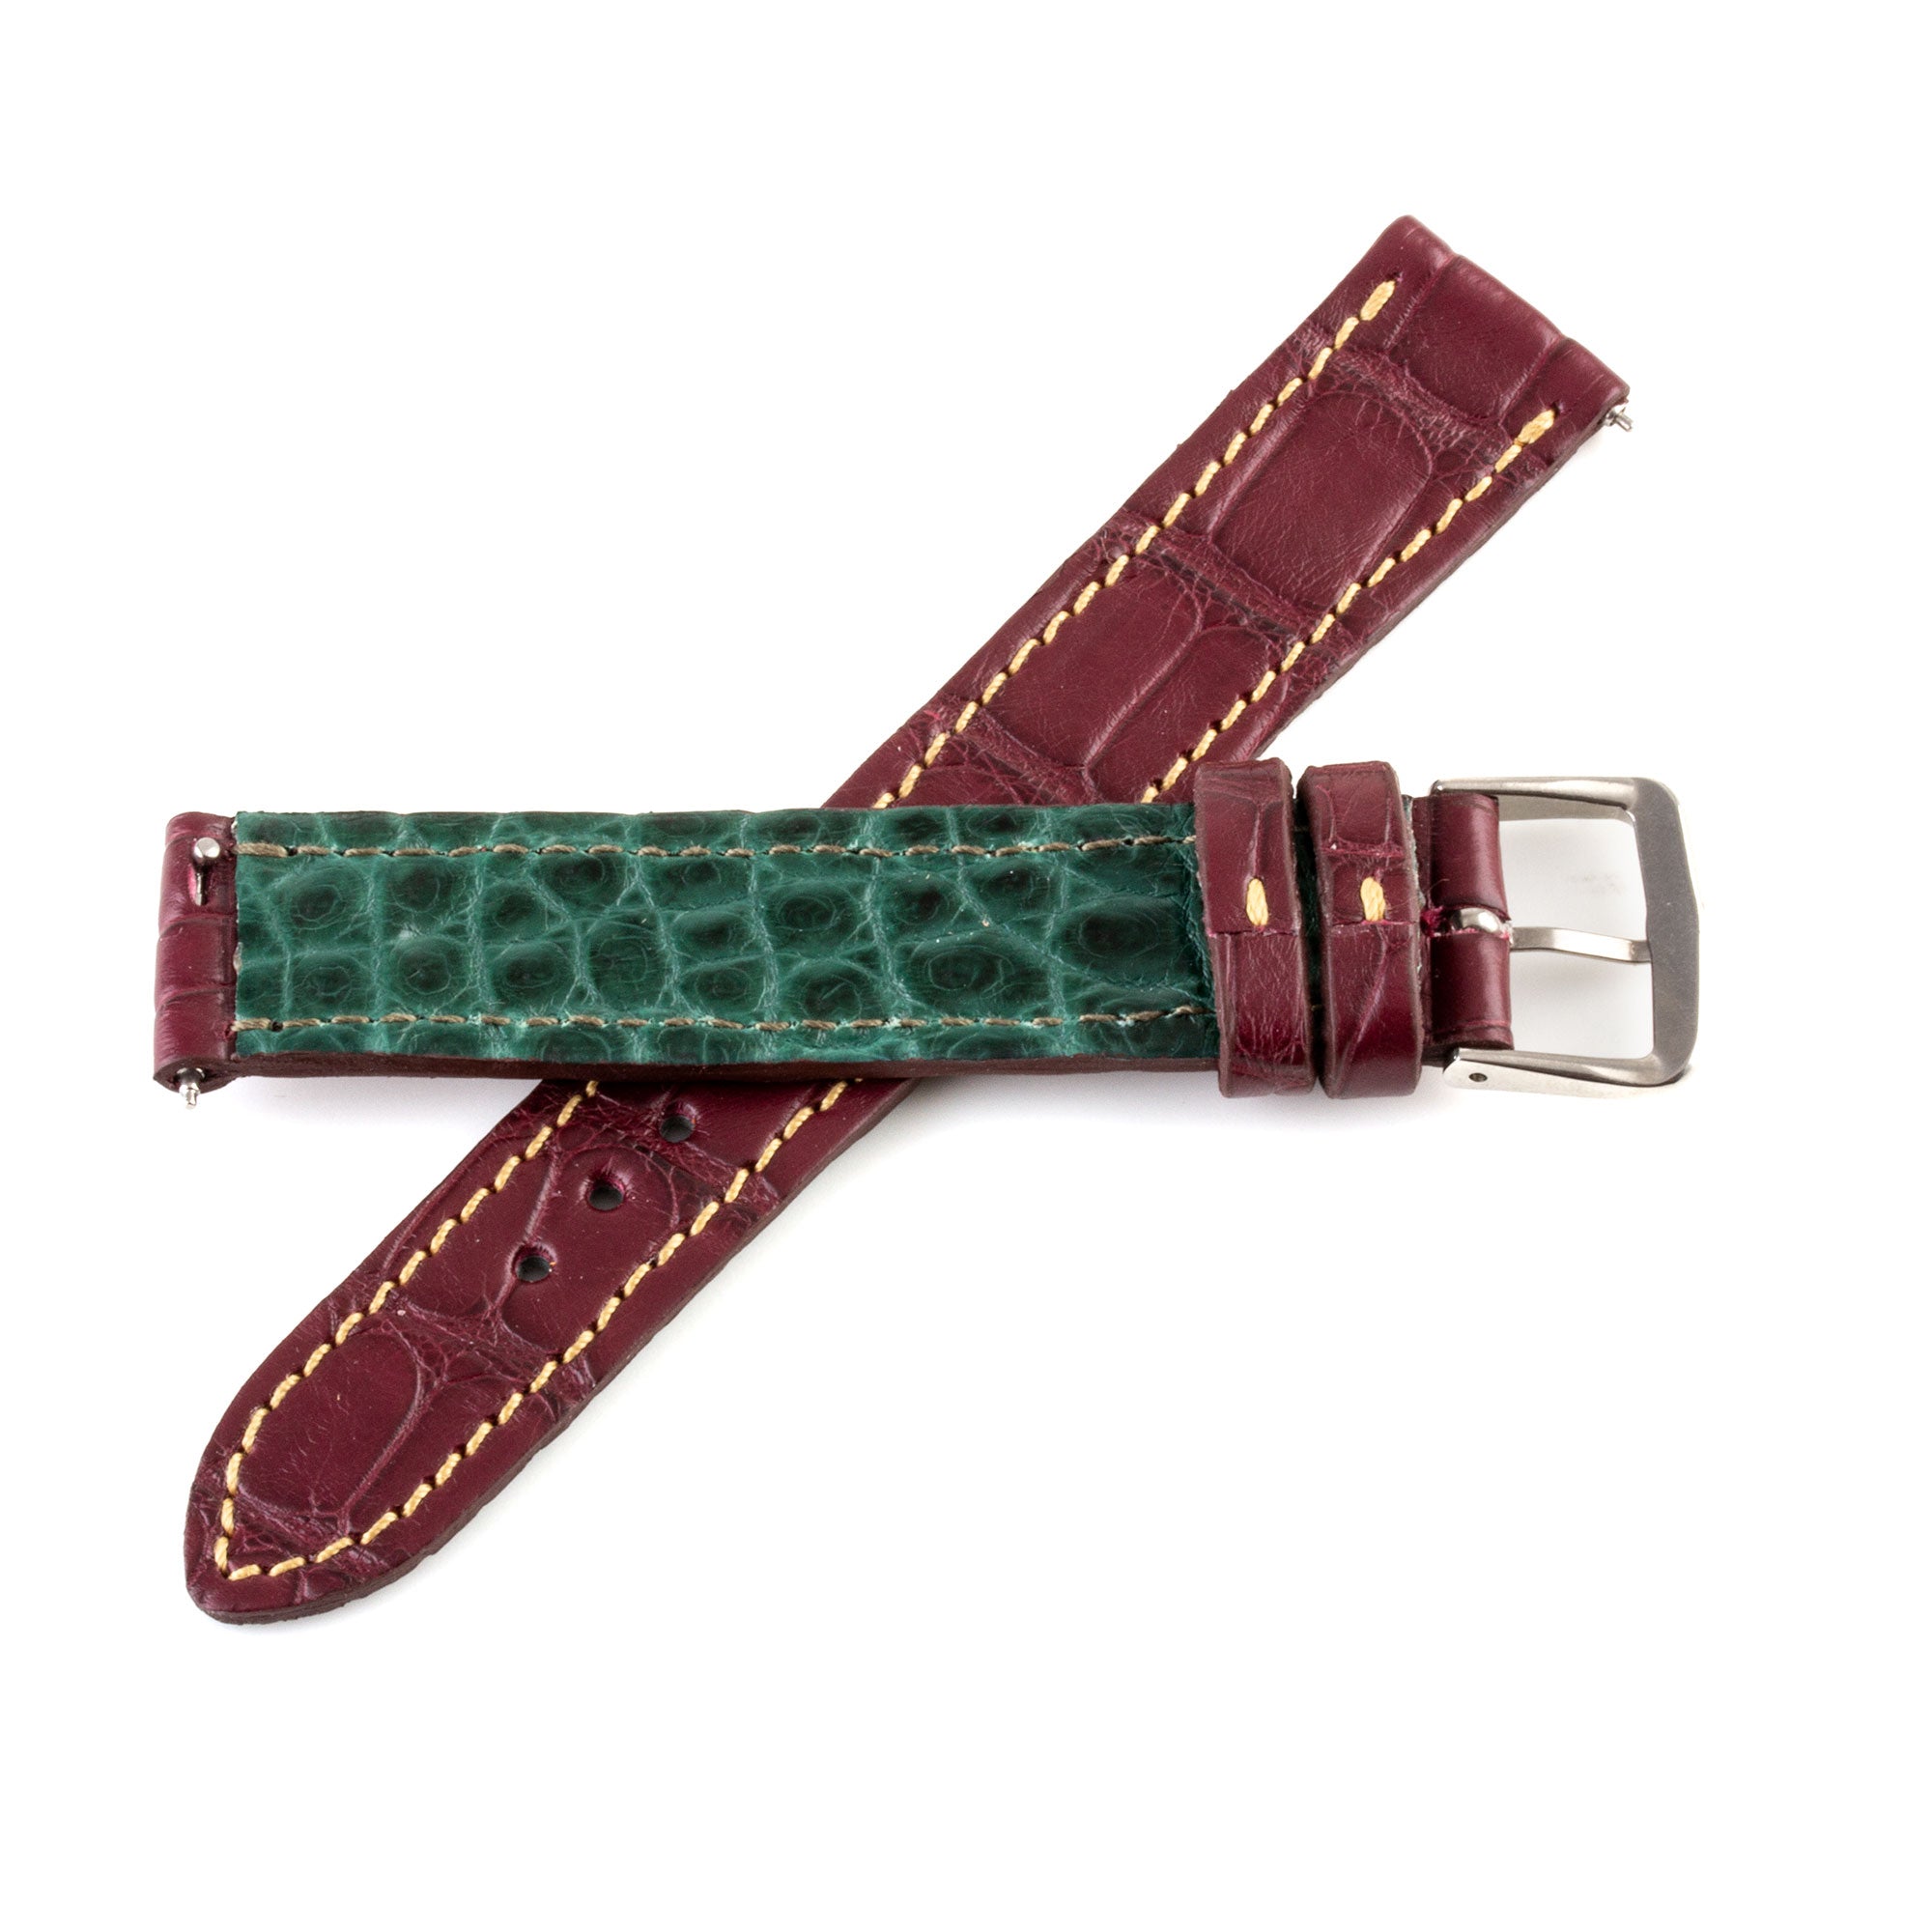 Alligator "Solo" leather watch band - 17mm width (0.67 inches) / Size M (n° 8)